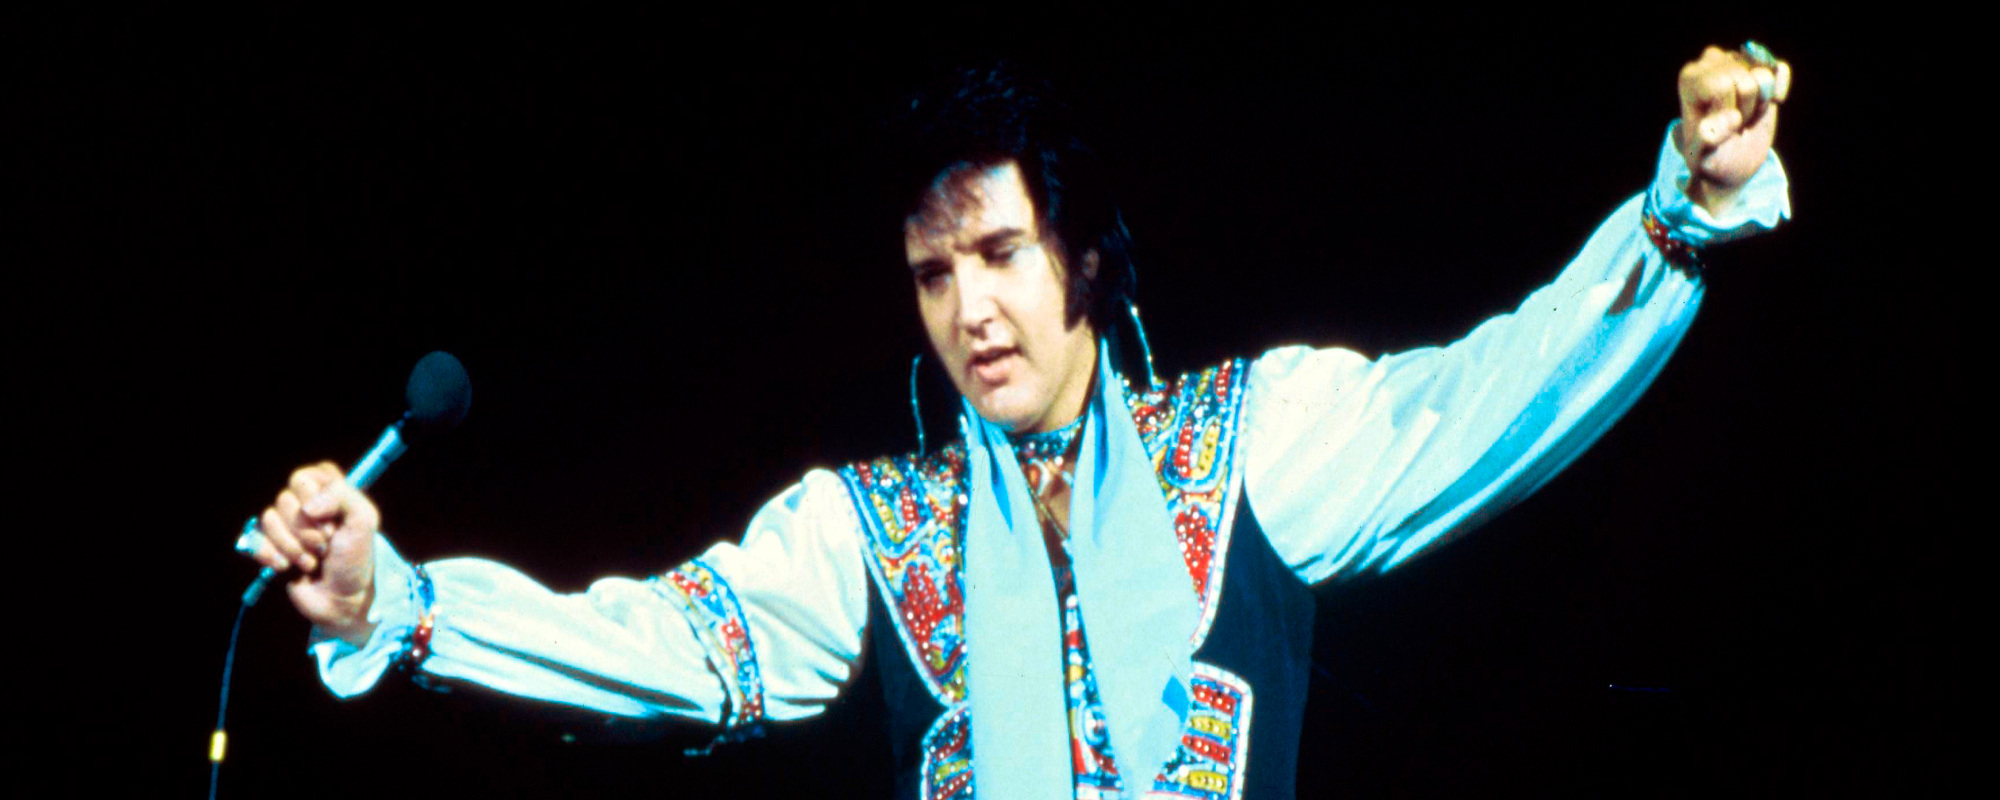 Bet you didn't know these musicians disliked Elvis Presley